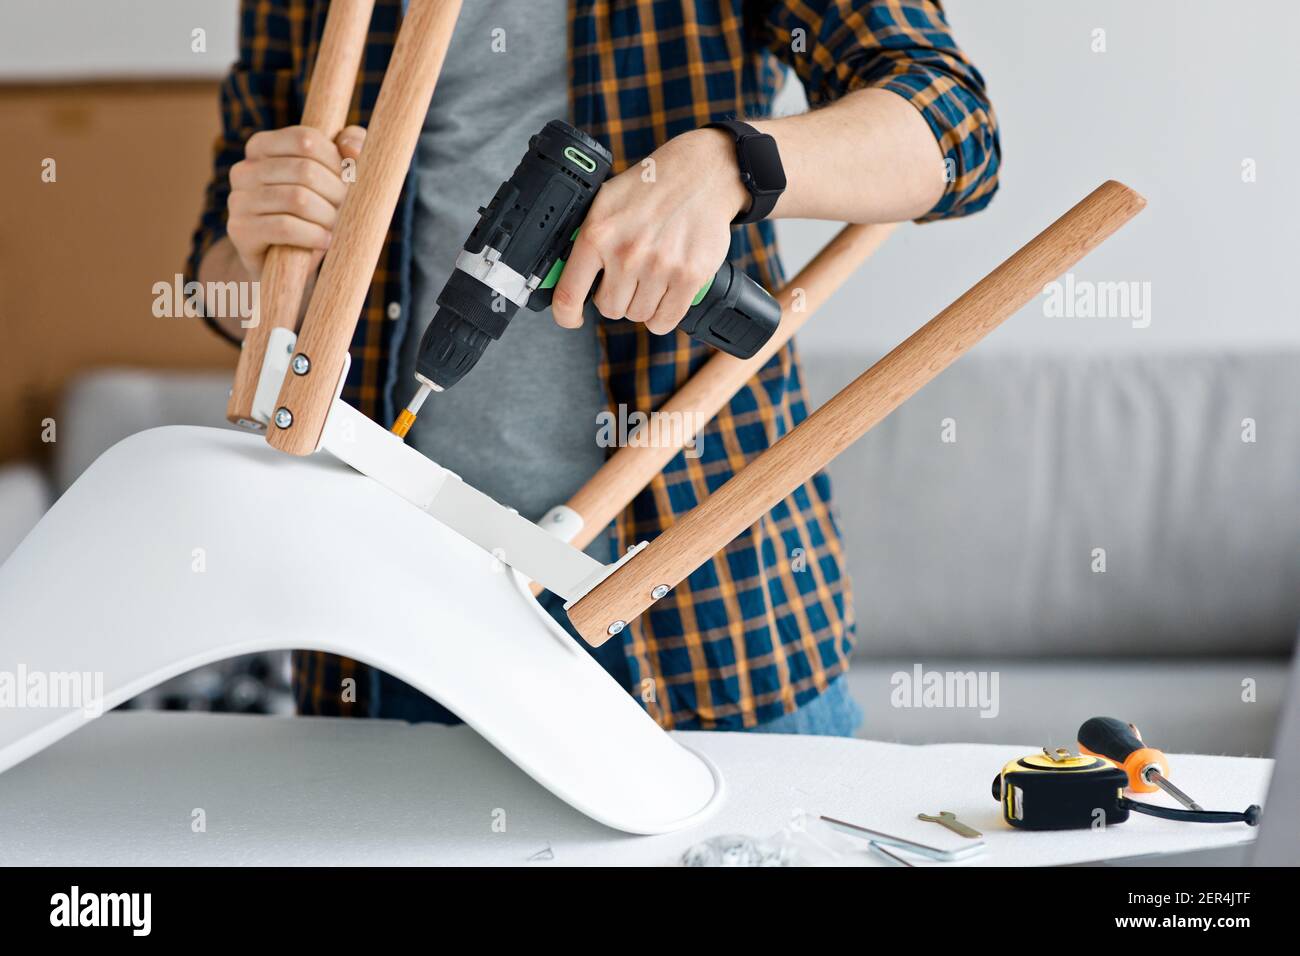 Craftsman collects and repairing with tools, assemble furniture with drill Stock Photo